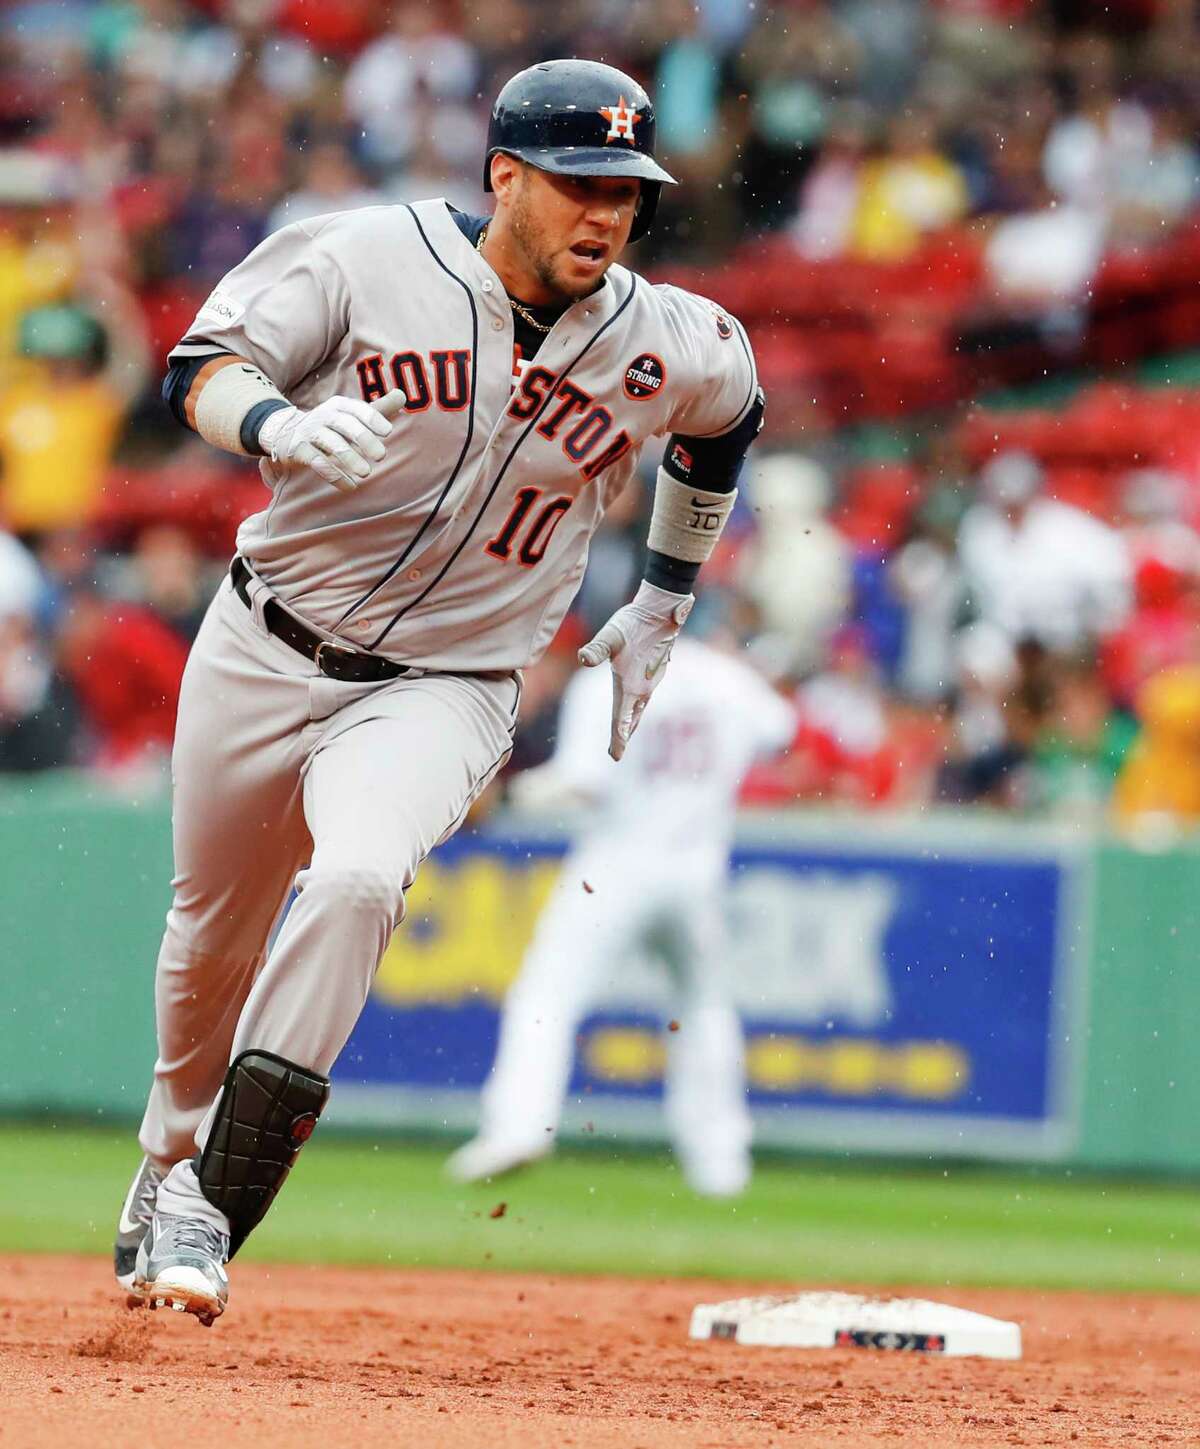 After tripling, doubling and singling in the Astros' Game 4 ALDS clincher at Boston, Astros first baseman Yuli Gurriel is hitting .529 (9-for-17) in the playoffs.